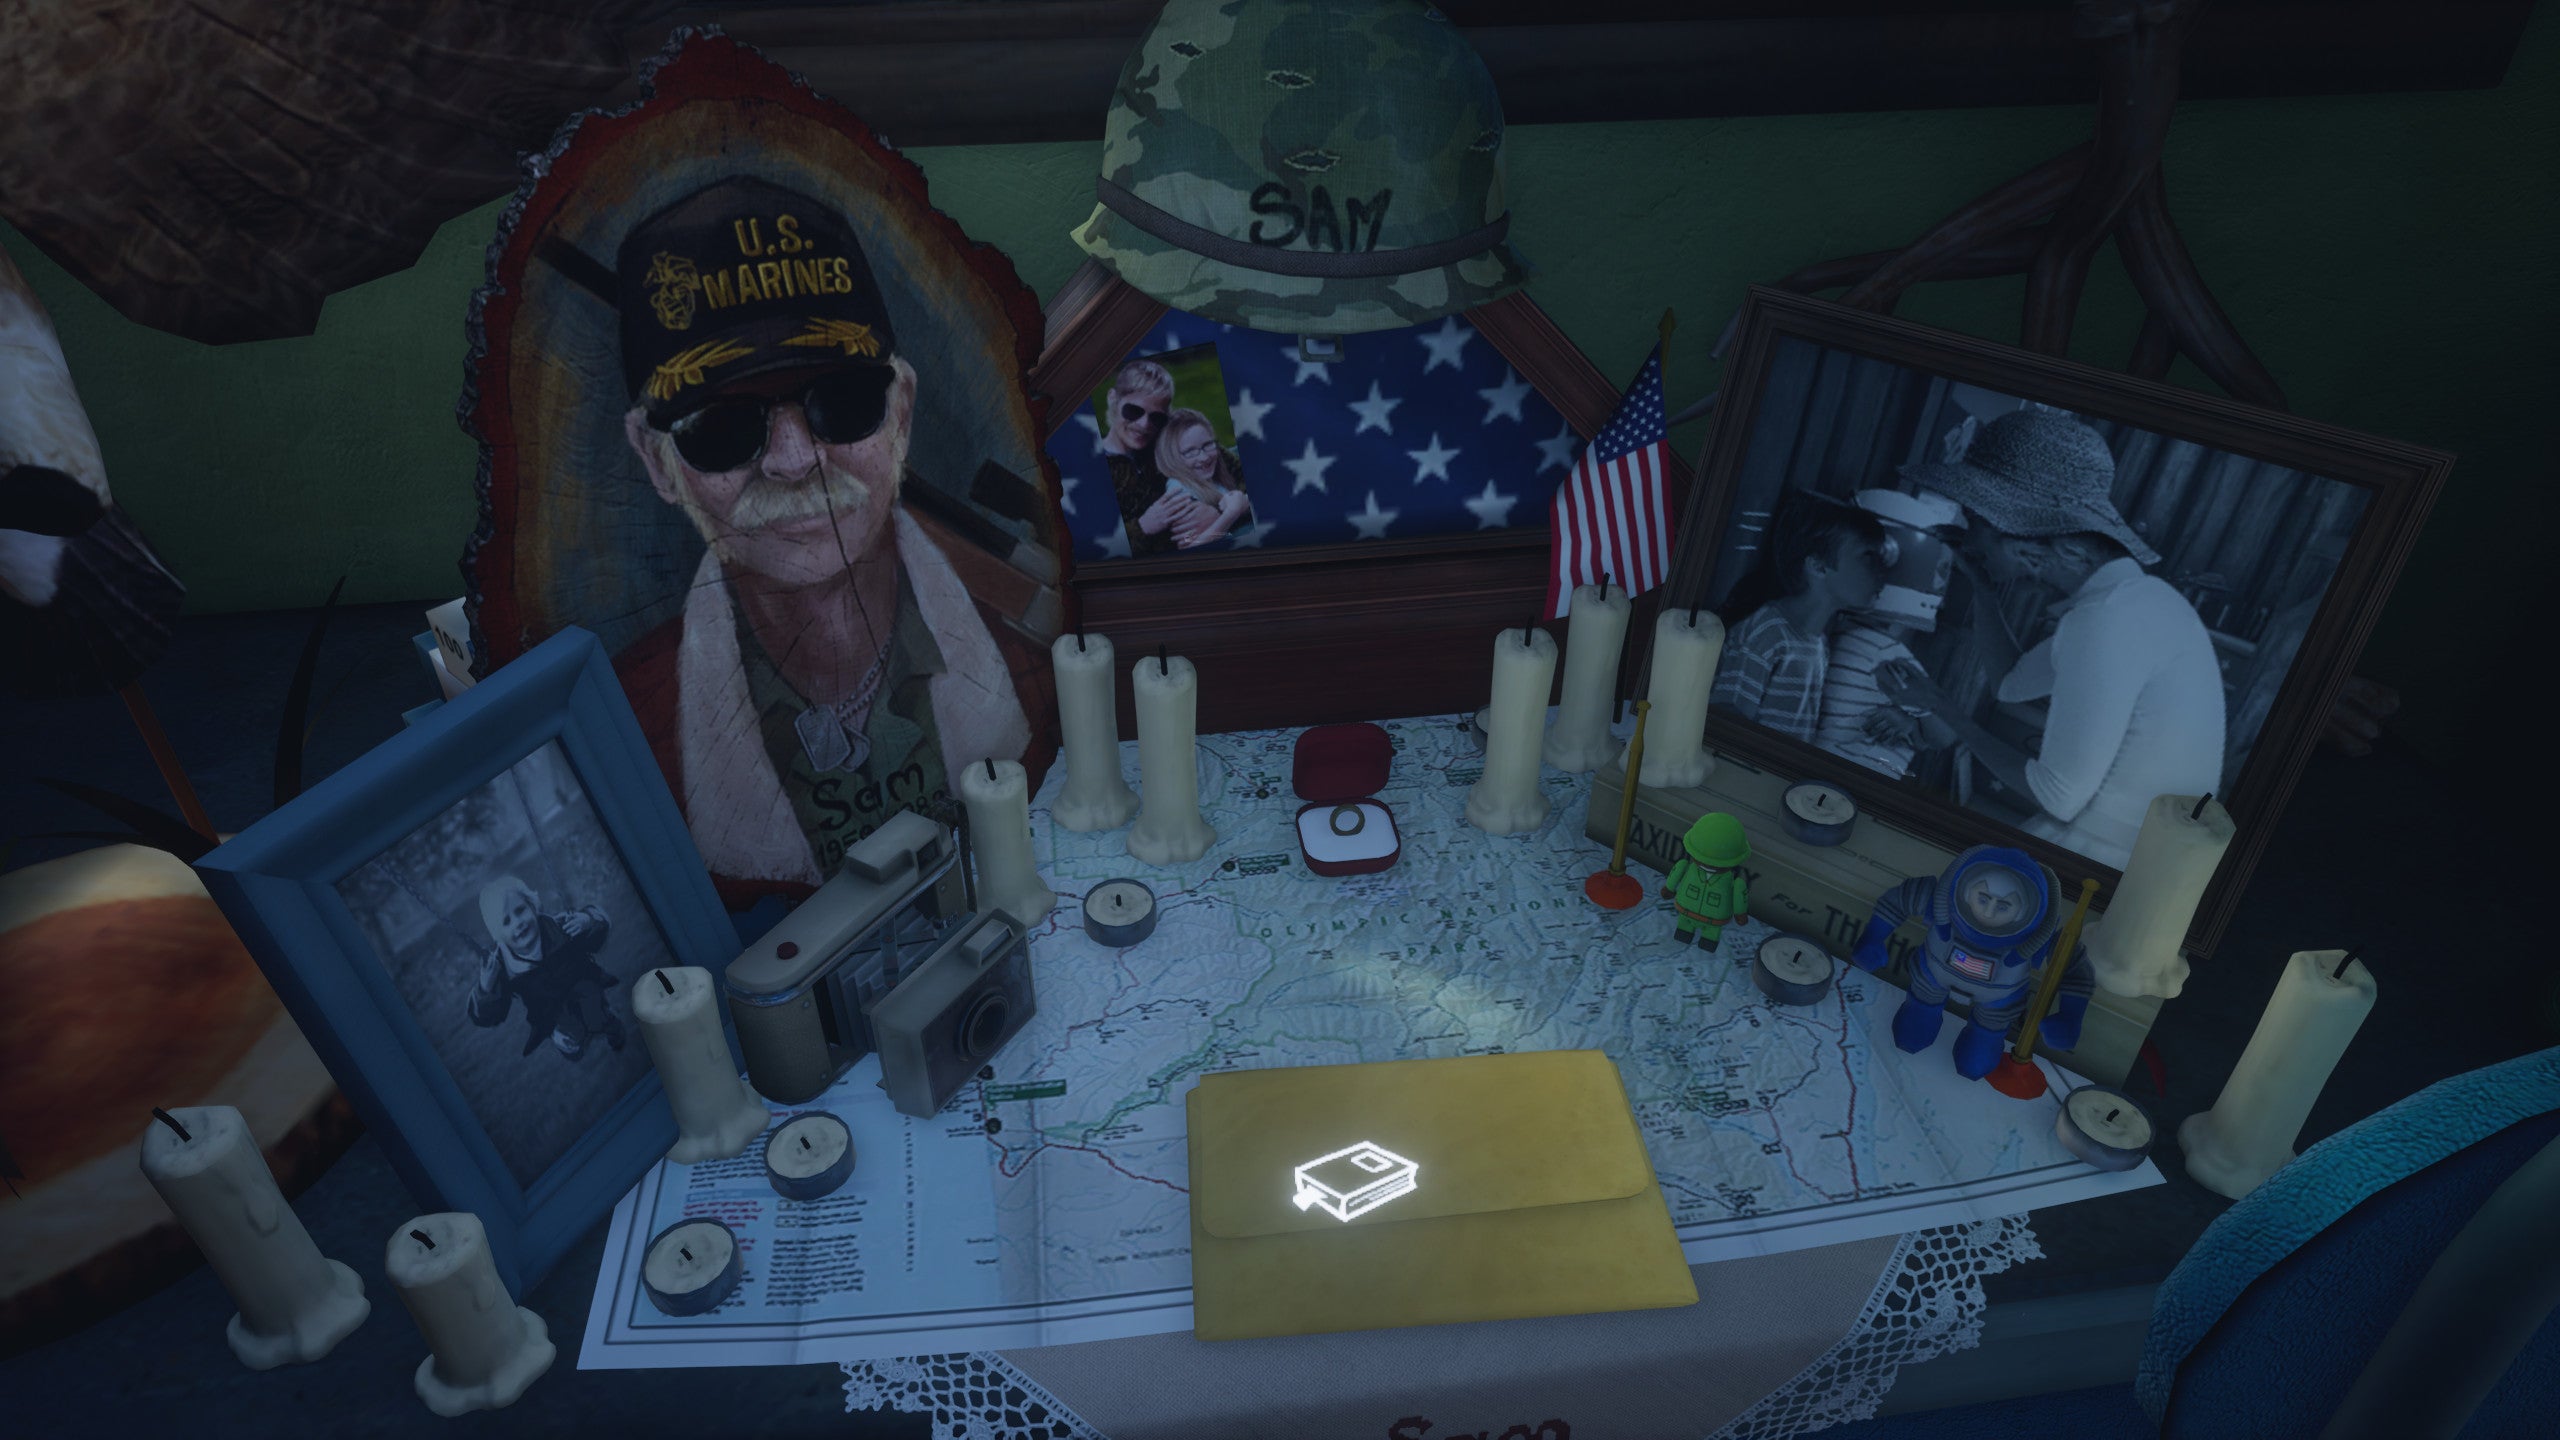 Sam Finch's shrine in a What Remains of Edith Finch screenshot.